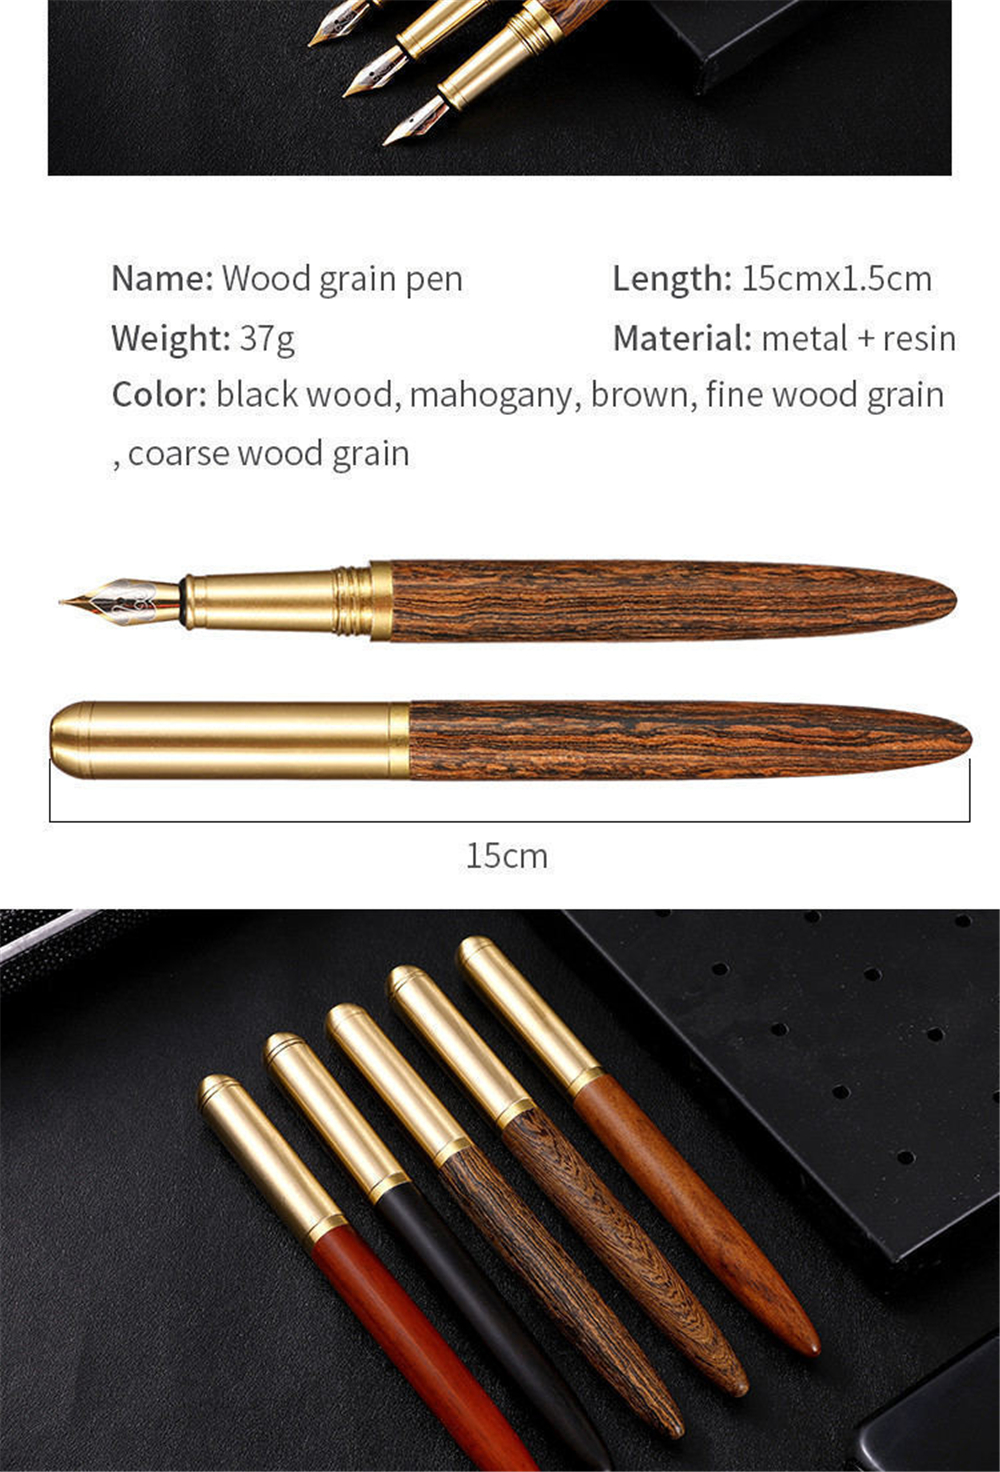 07mm-Nib-Wood-Fountain-Pen-Ink-Classic-Metal-Wood-Pen-Calligraphy-Writing-Business-Gifts-Stationery--1782368-2